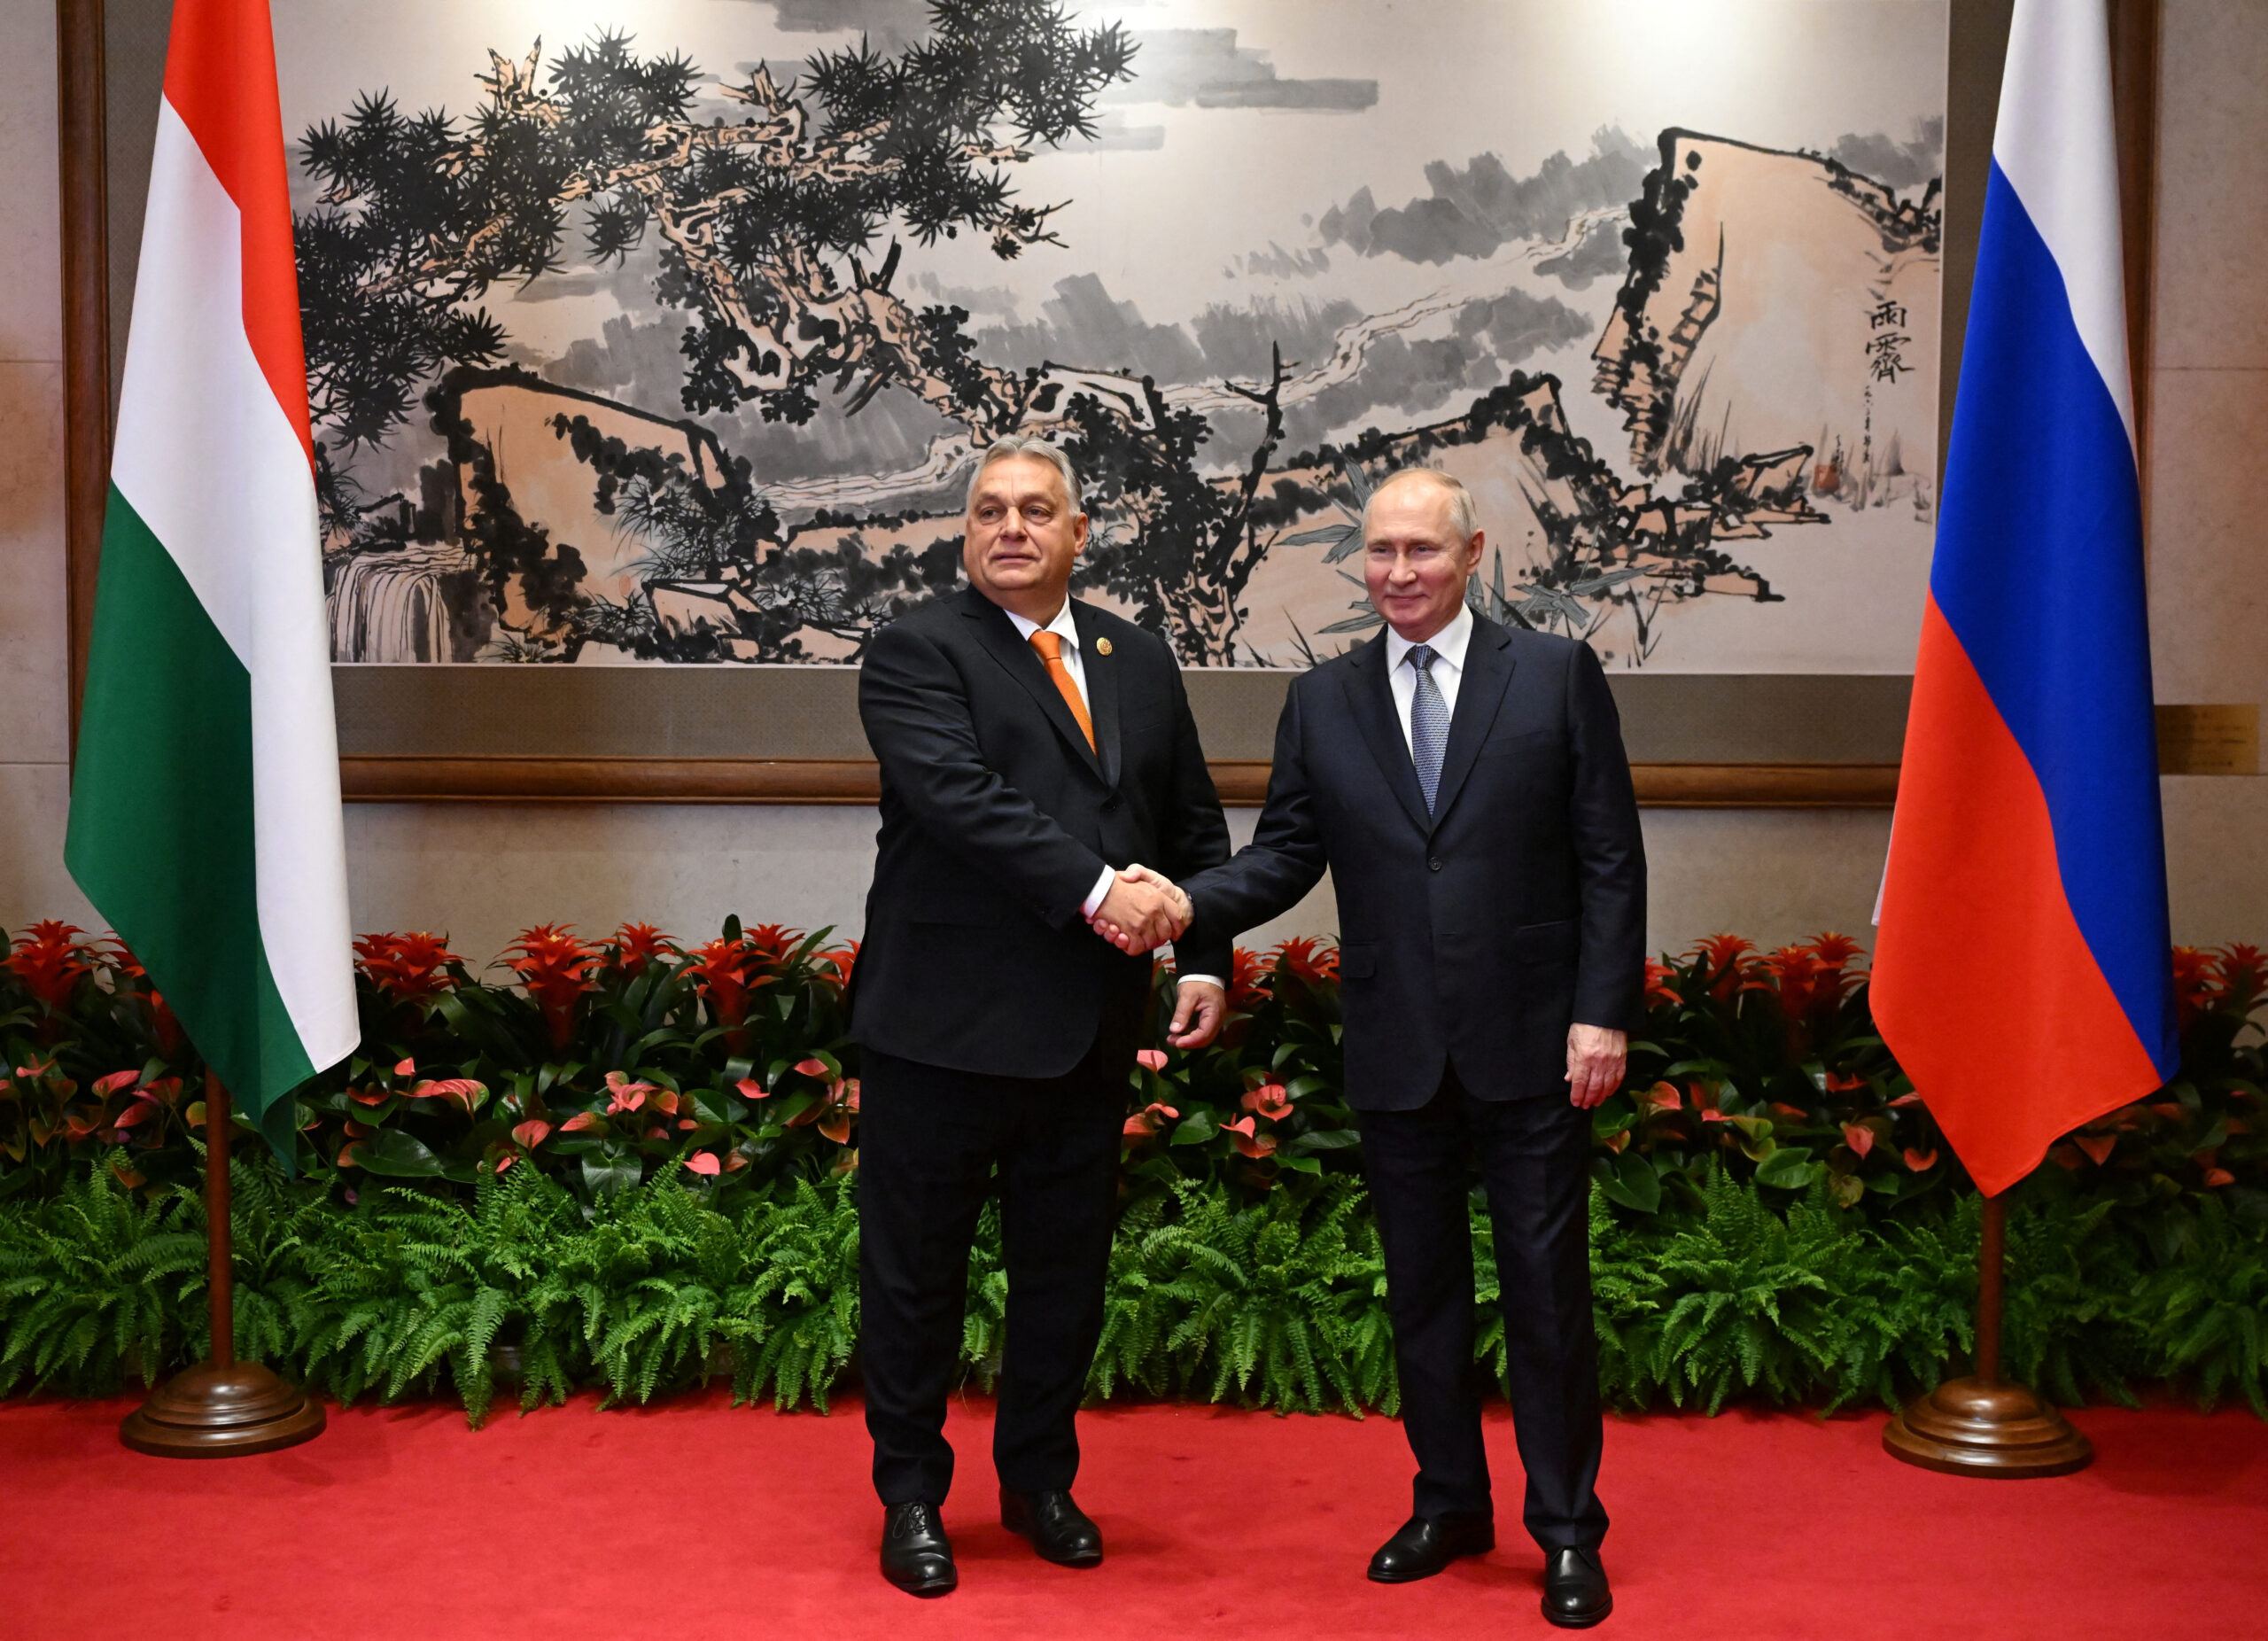 Russian President Putin and Hungarian Prime Minister Orban meet in Beijing.